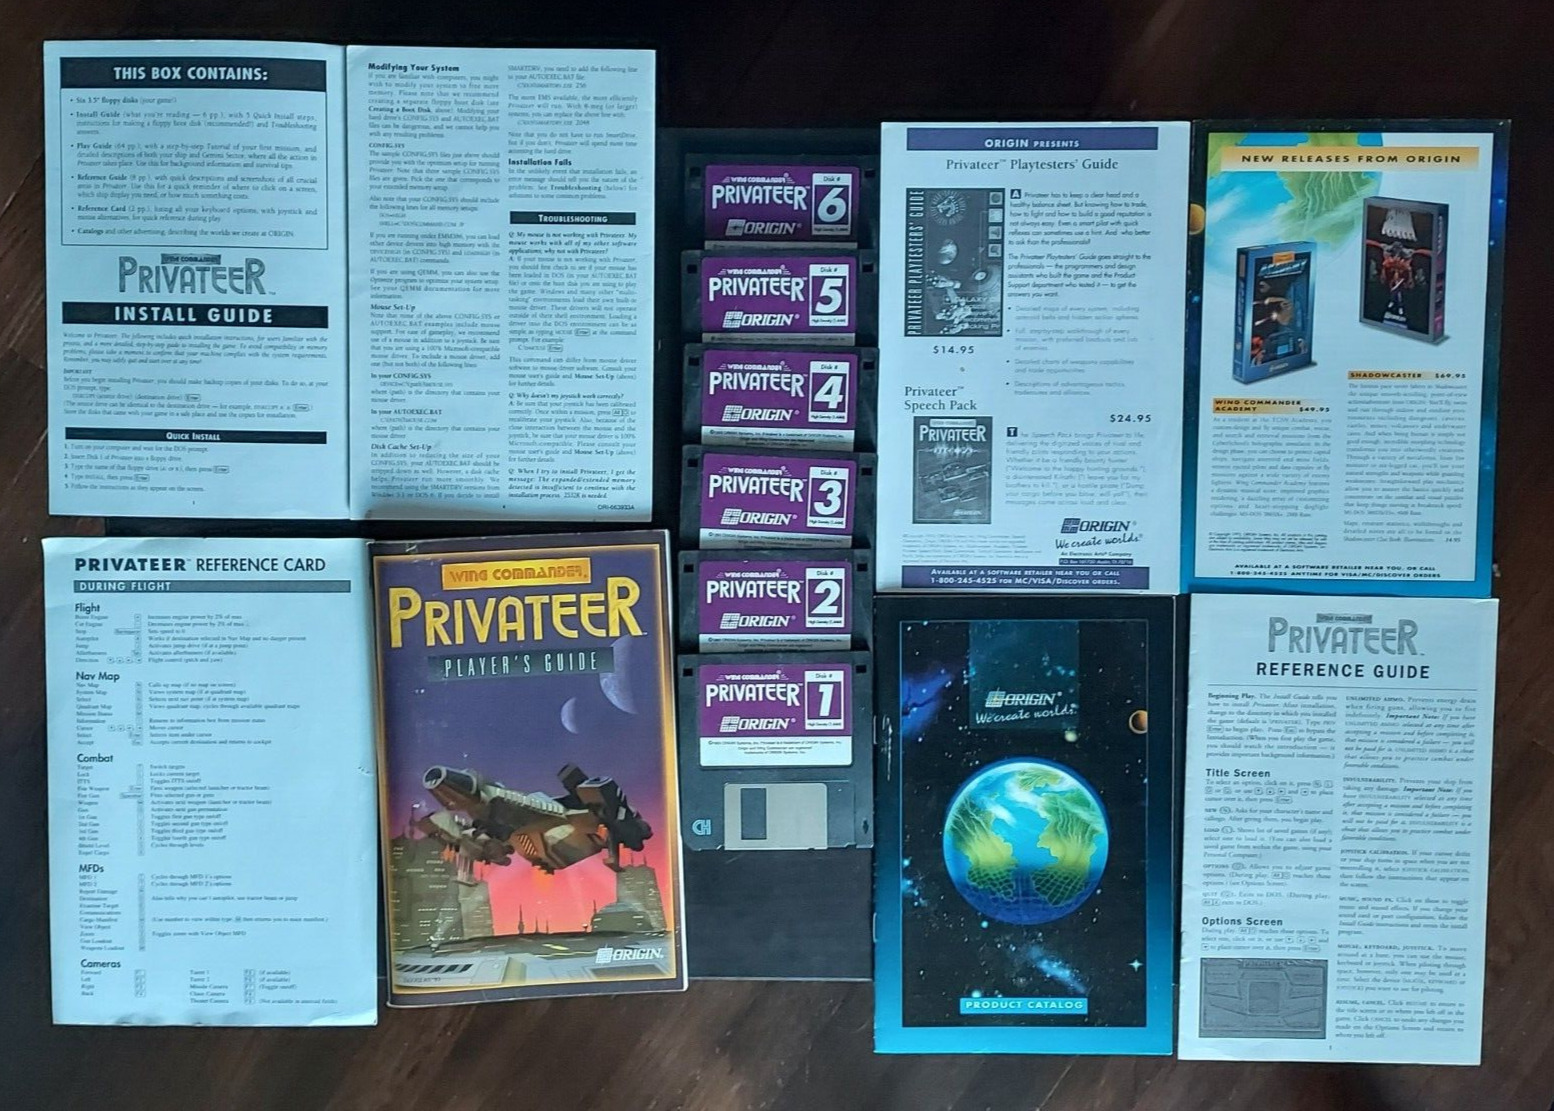 WING COMMANDER PRIVATEER - ORIGIN GAME PC MS-DOS 3.5" DISKS  - NOT TESTED